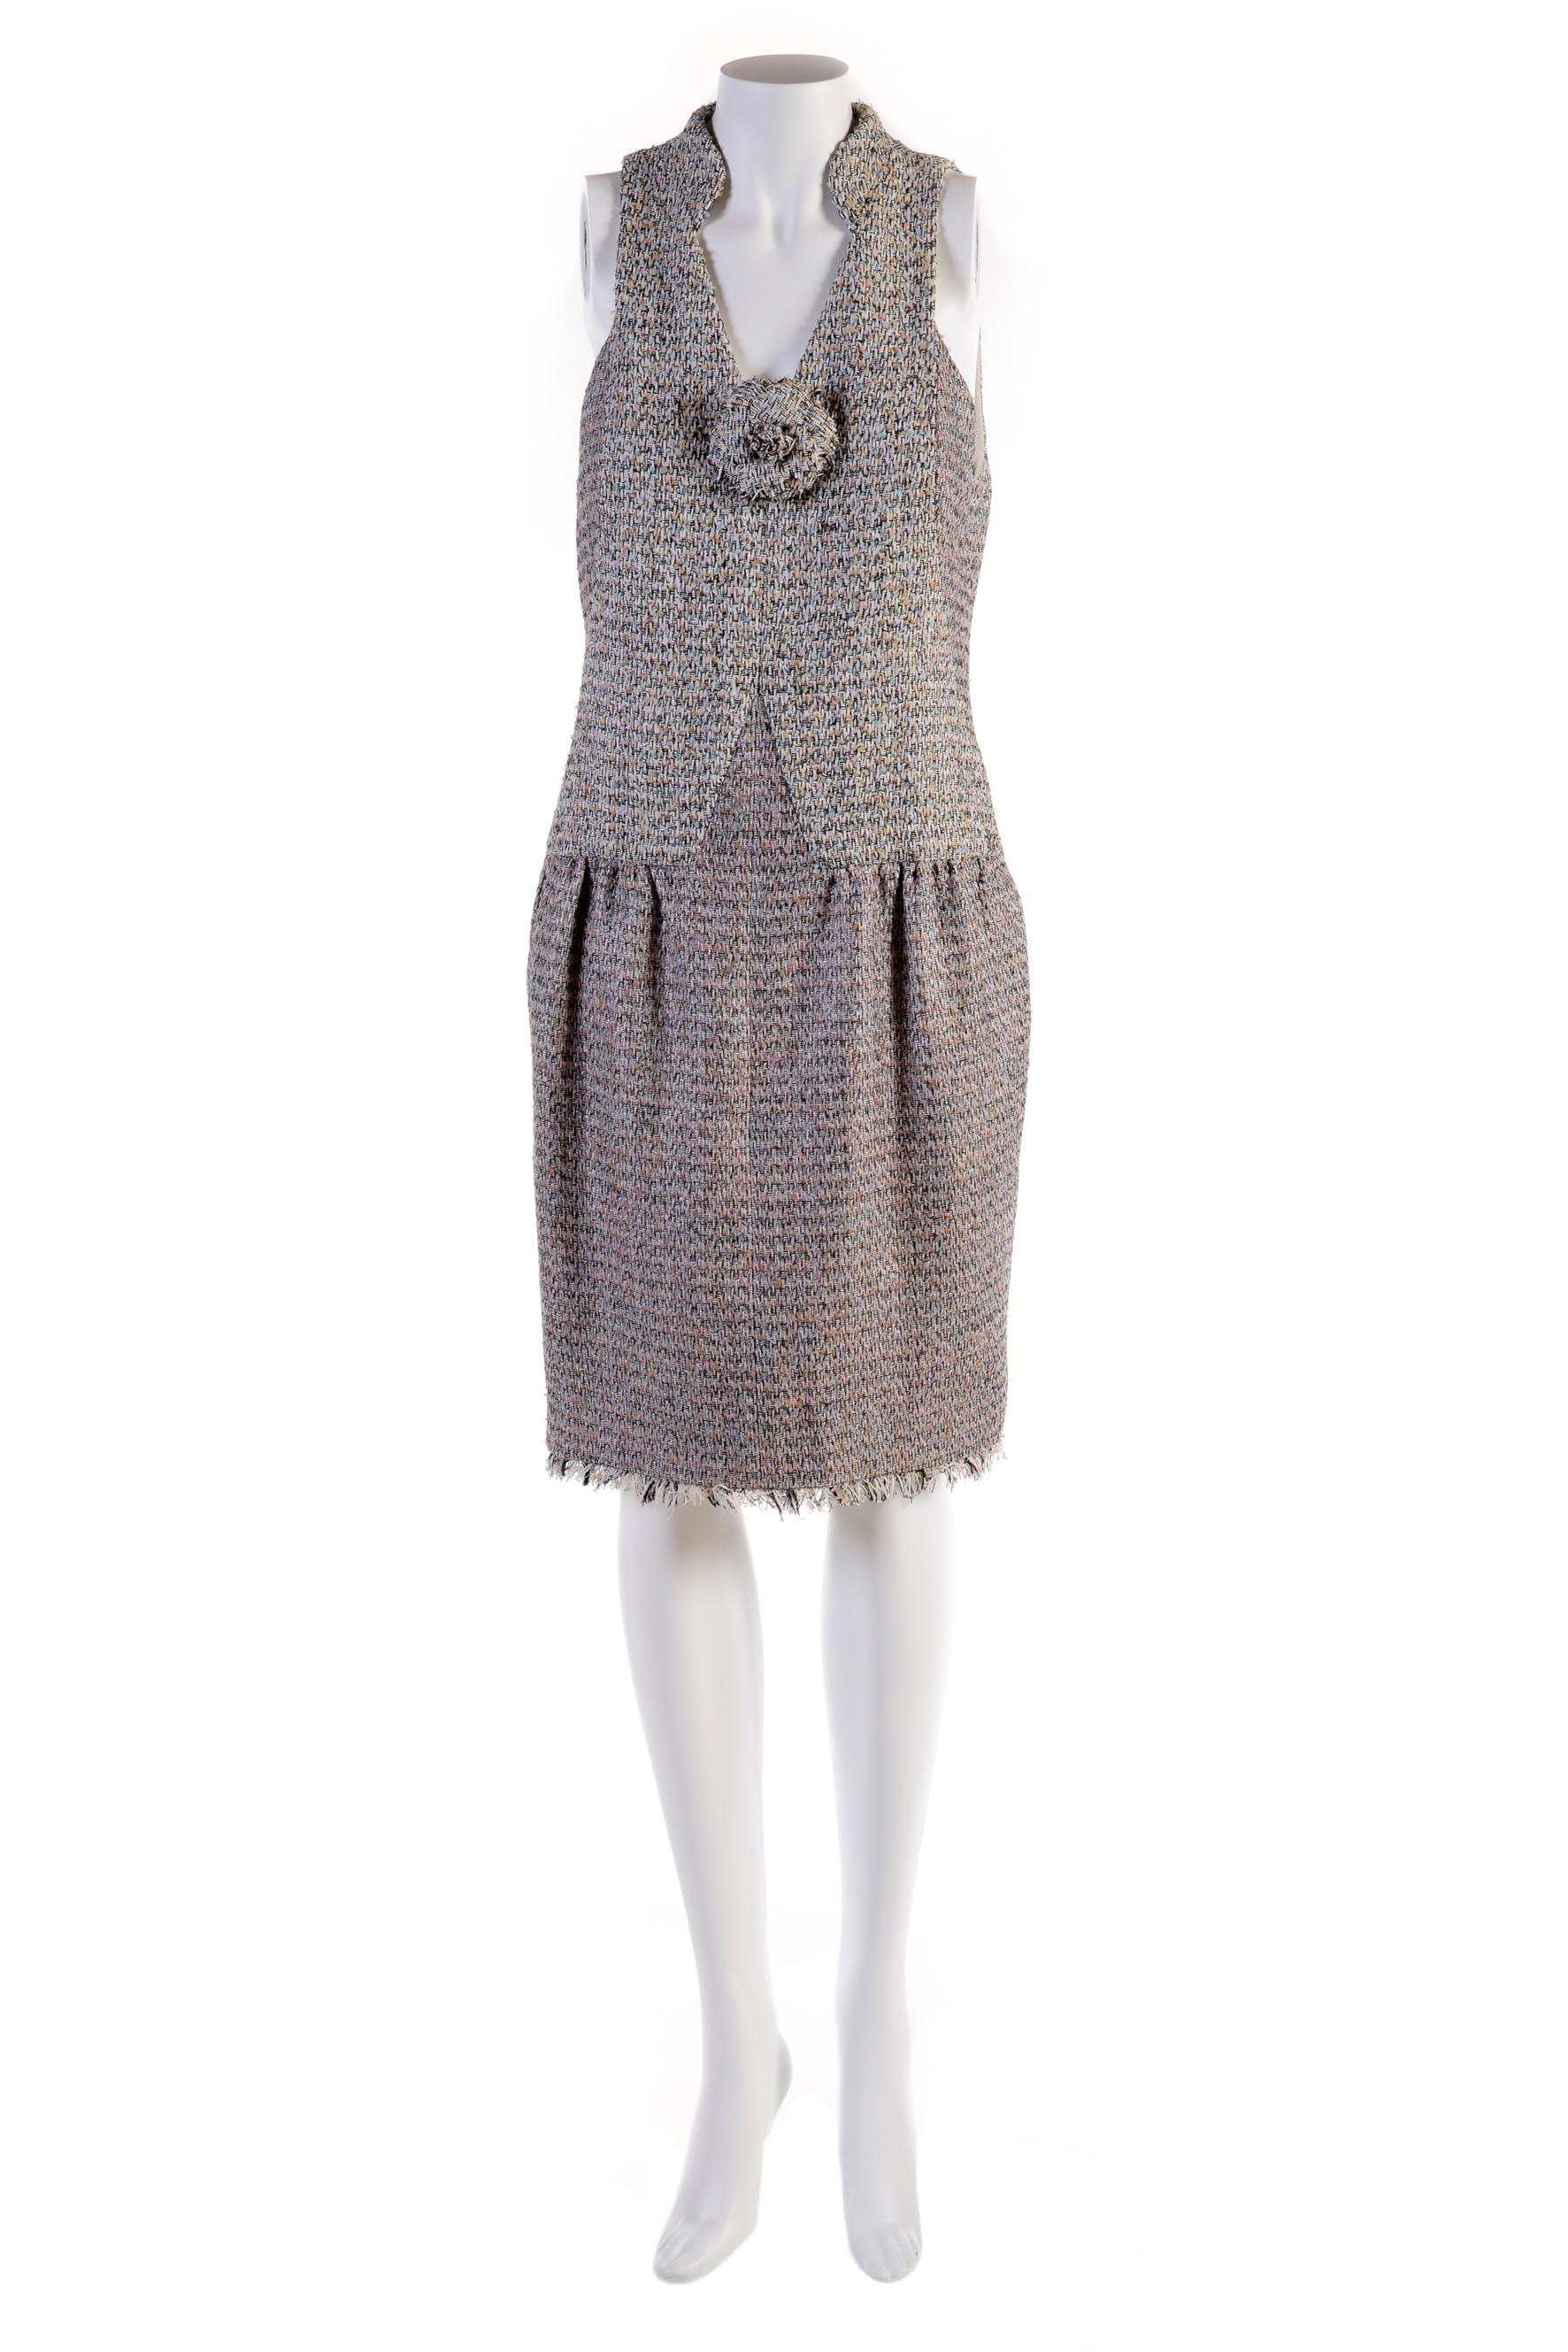 Chanel tweed  cotton dress with camelia Spring 2011
Size FR 40
Made in France
62% cotton
33% polyamid
  5% viscose
Fully silk lined
Flat measures:
Length cm. 97
Shoulders cm. 28
Bust cm. 46
Waistline cm. 46
Back zip
Excellents  conditions
